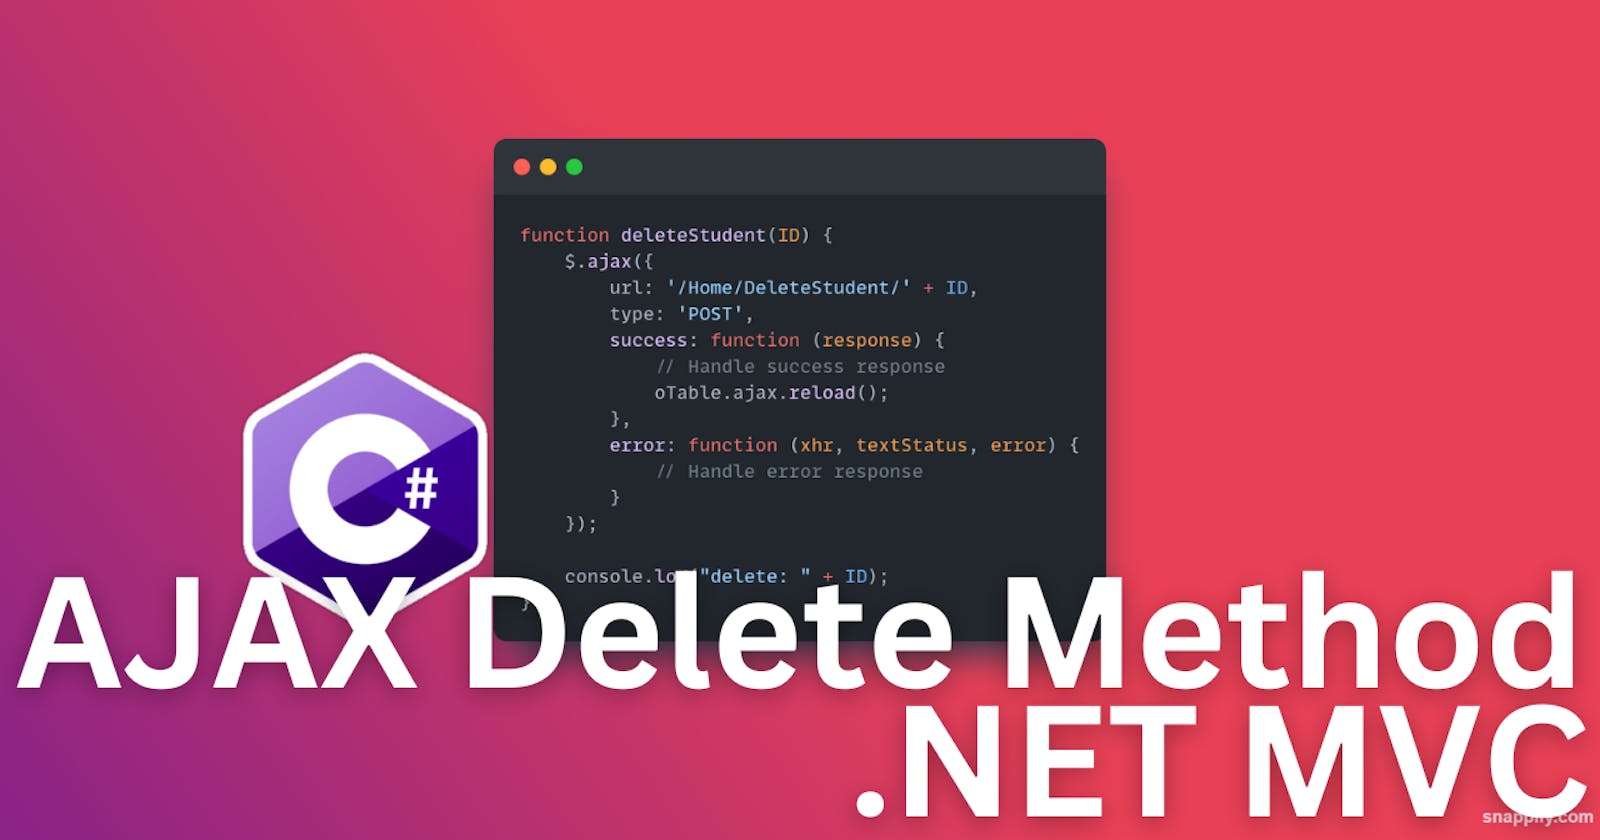 Building an AJAX Delete Method for Student Records in ASP.NET MVC